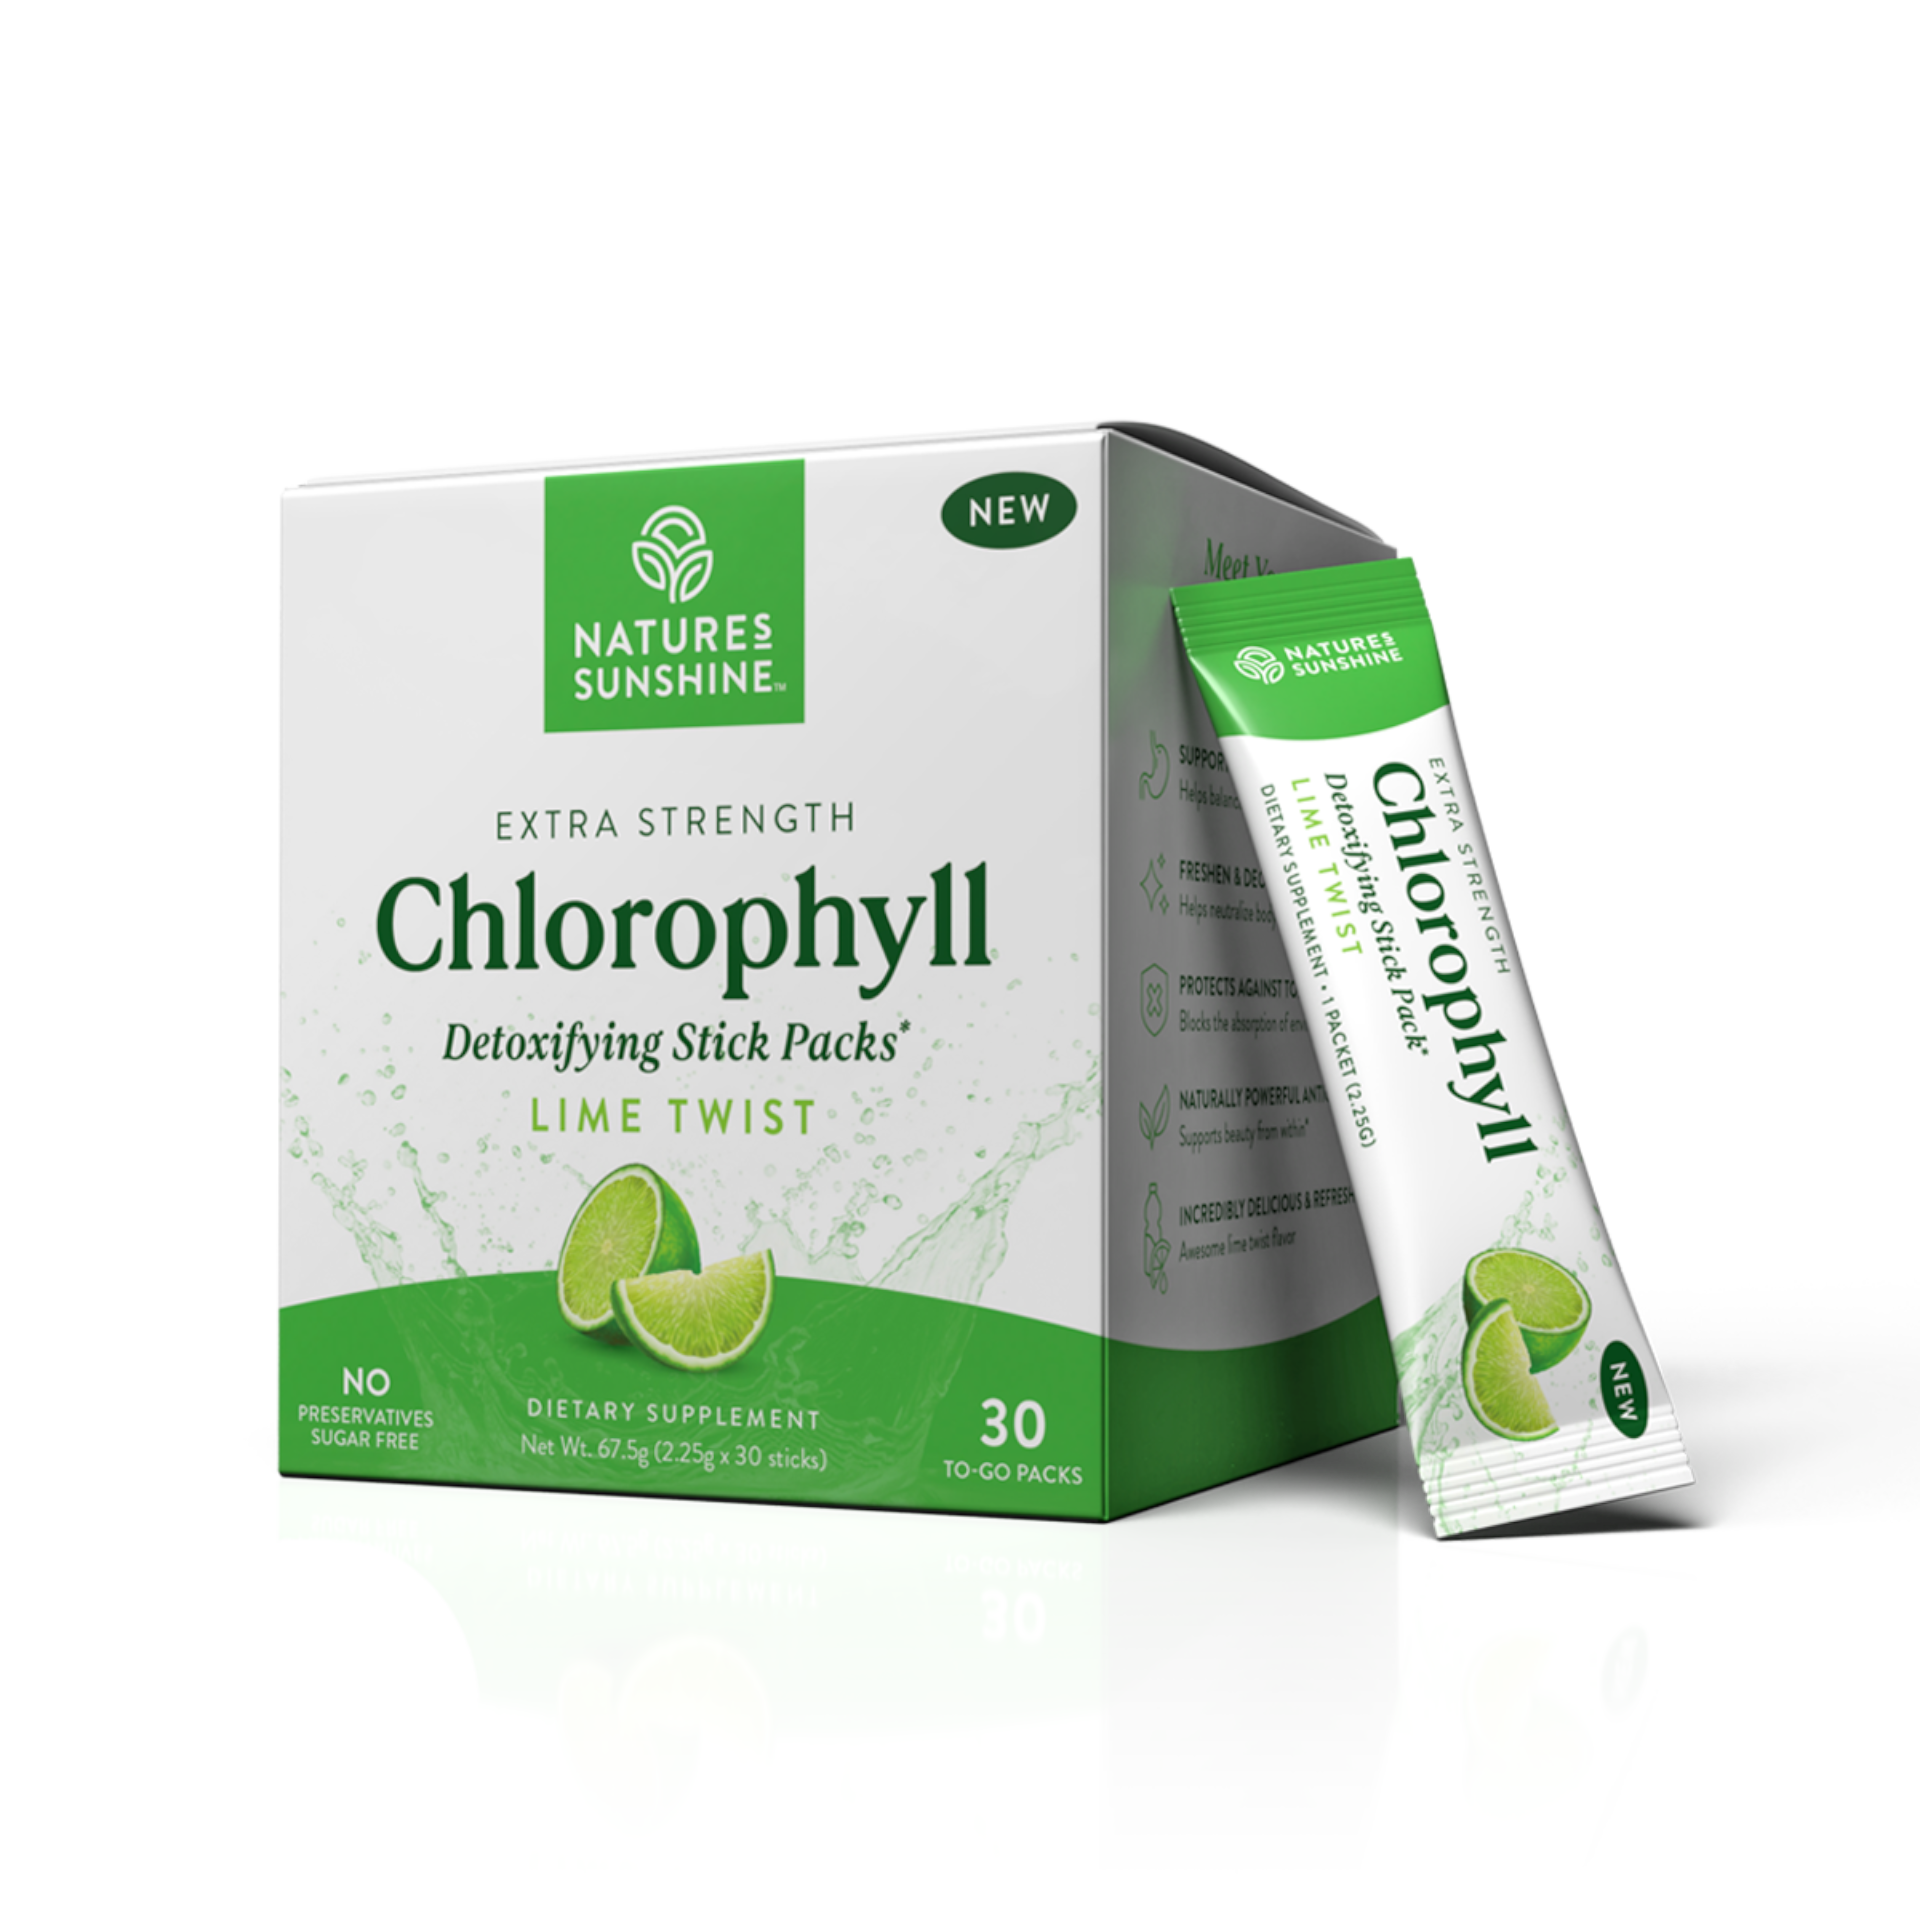 new product; powder Chlorphyll to add to water; 